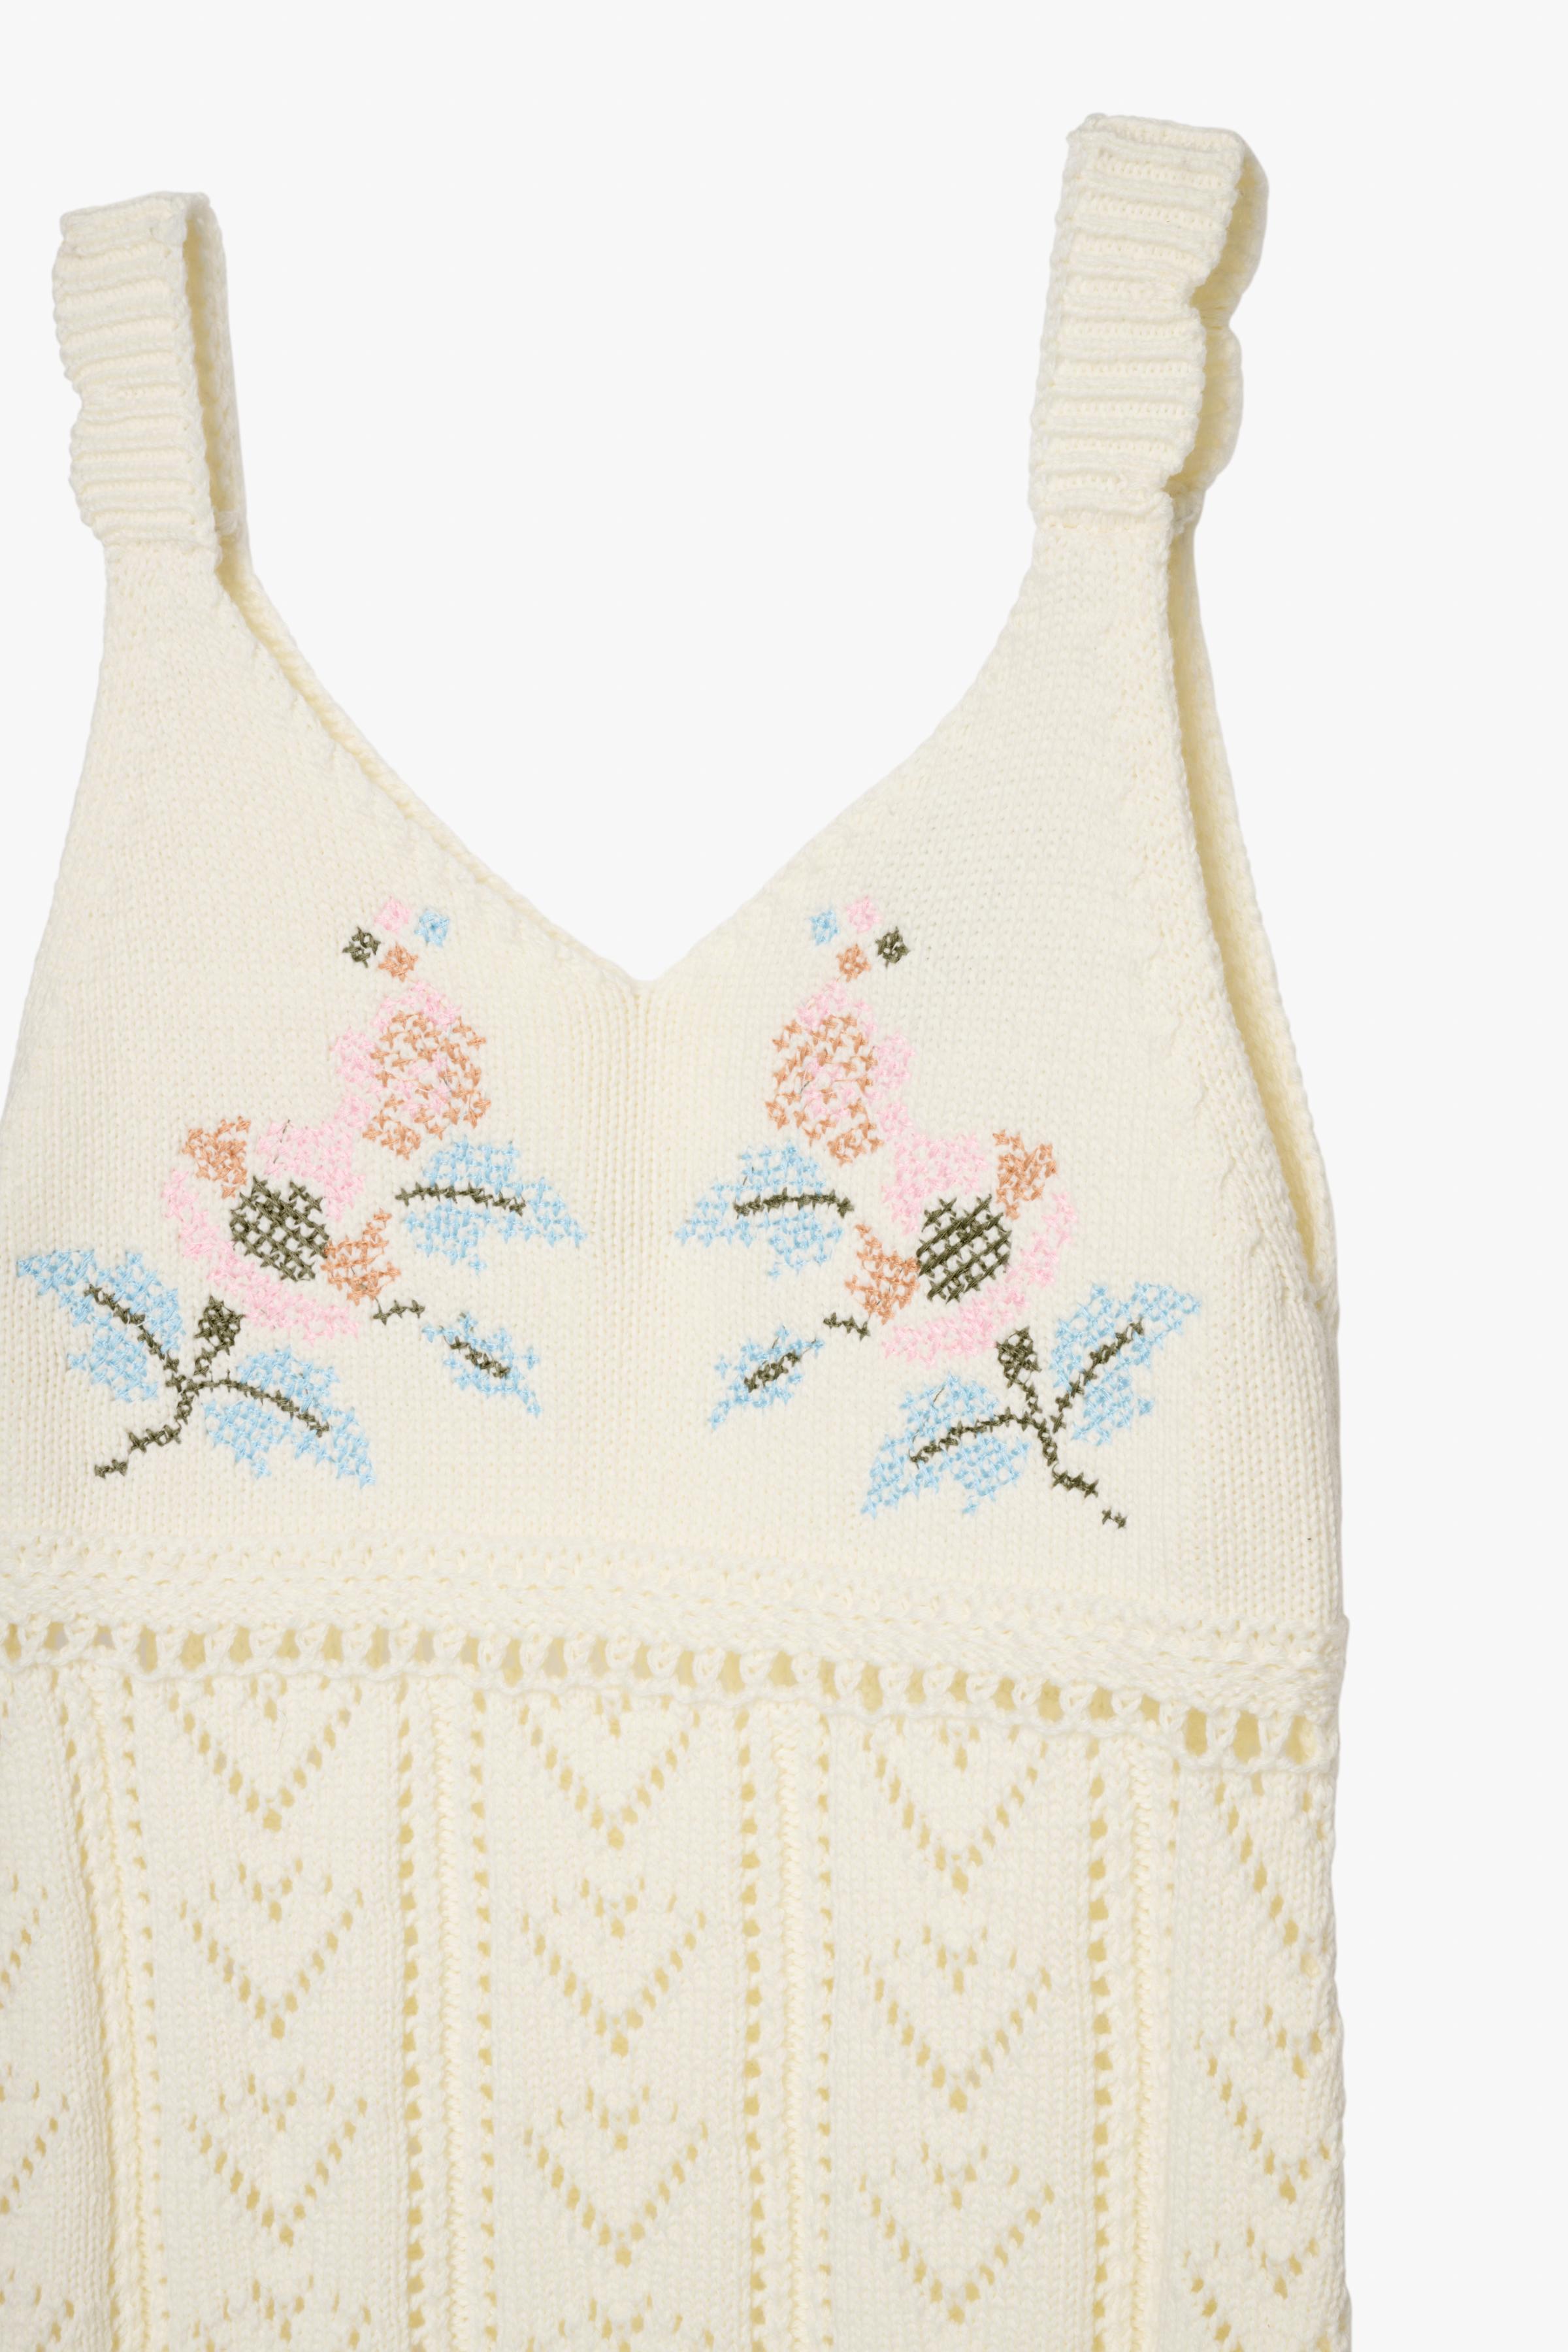 EMBROIDERED FLOWER KNIT DRESS LIMITED EDITION - Oyster-white 